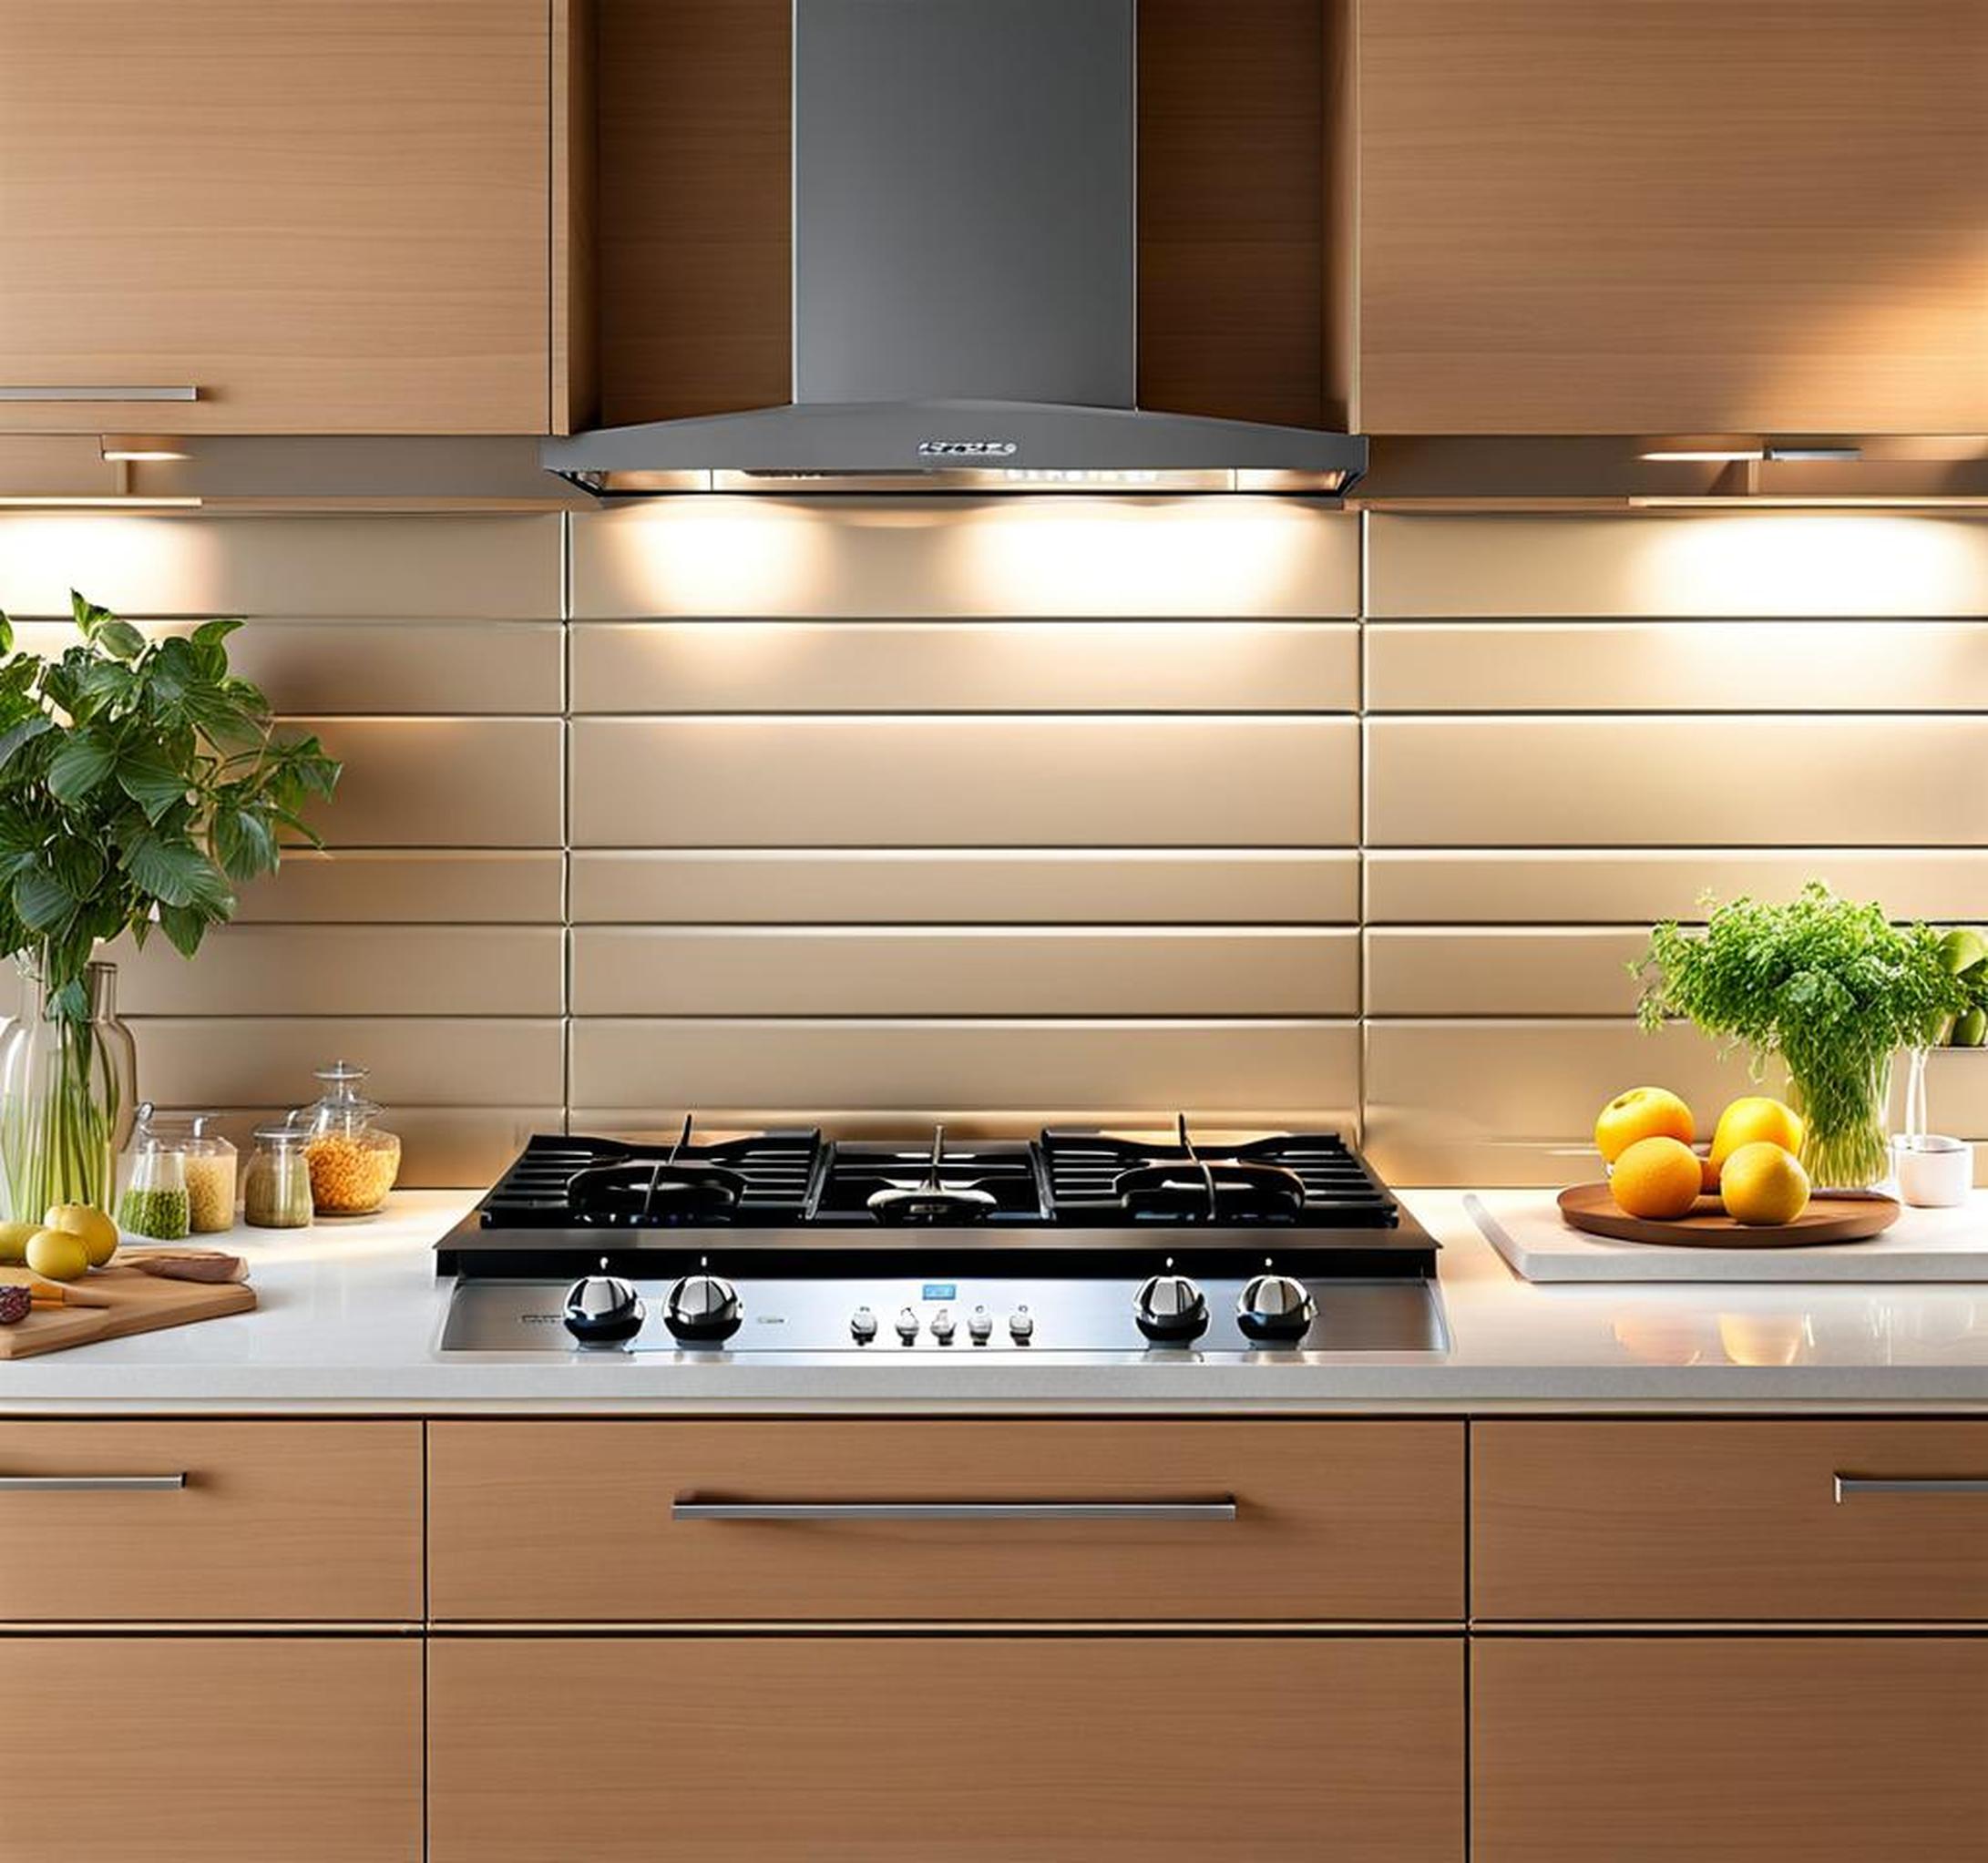 Level Up Your Kitchen Style With An Easy, Affordable Backsplash